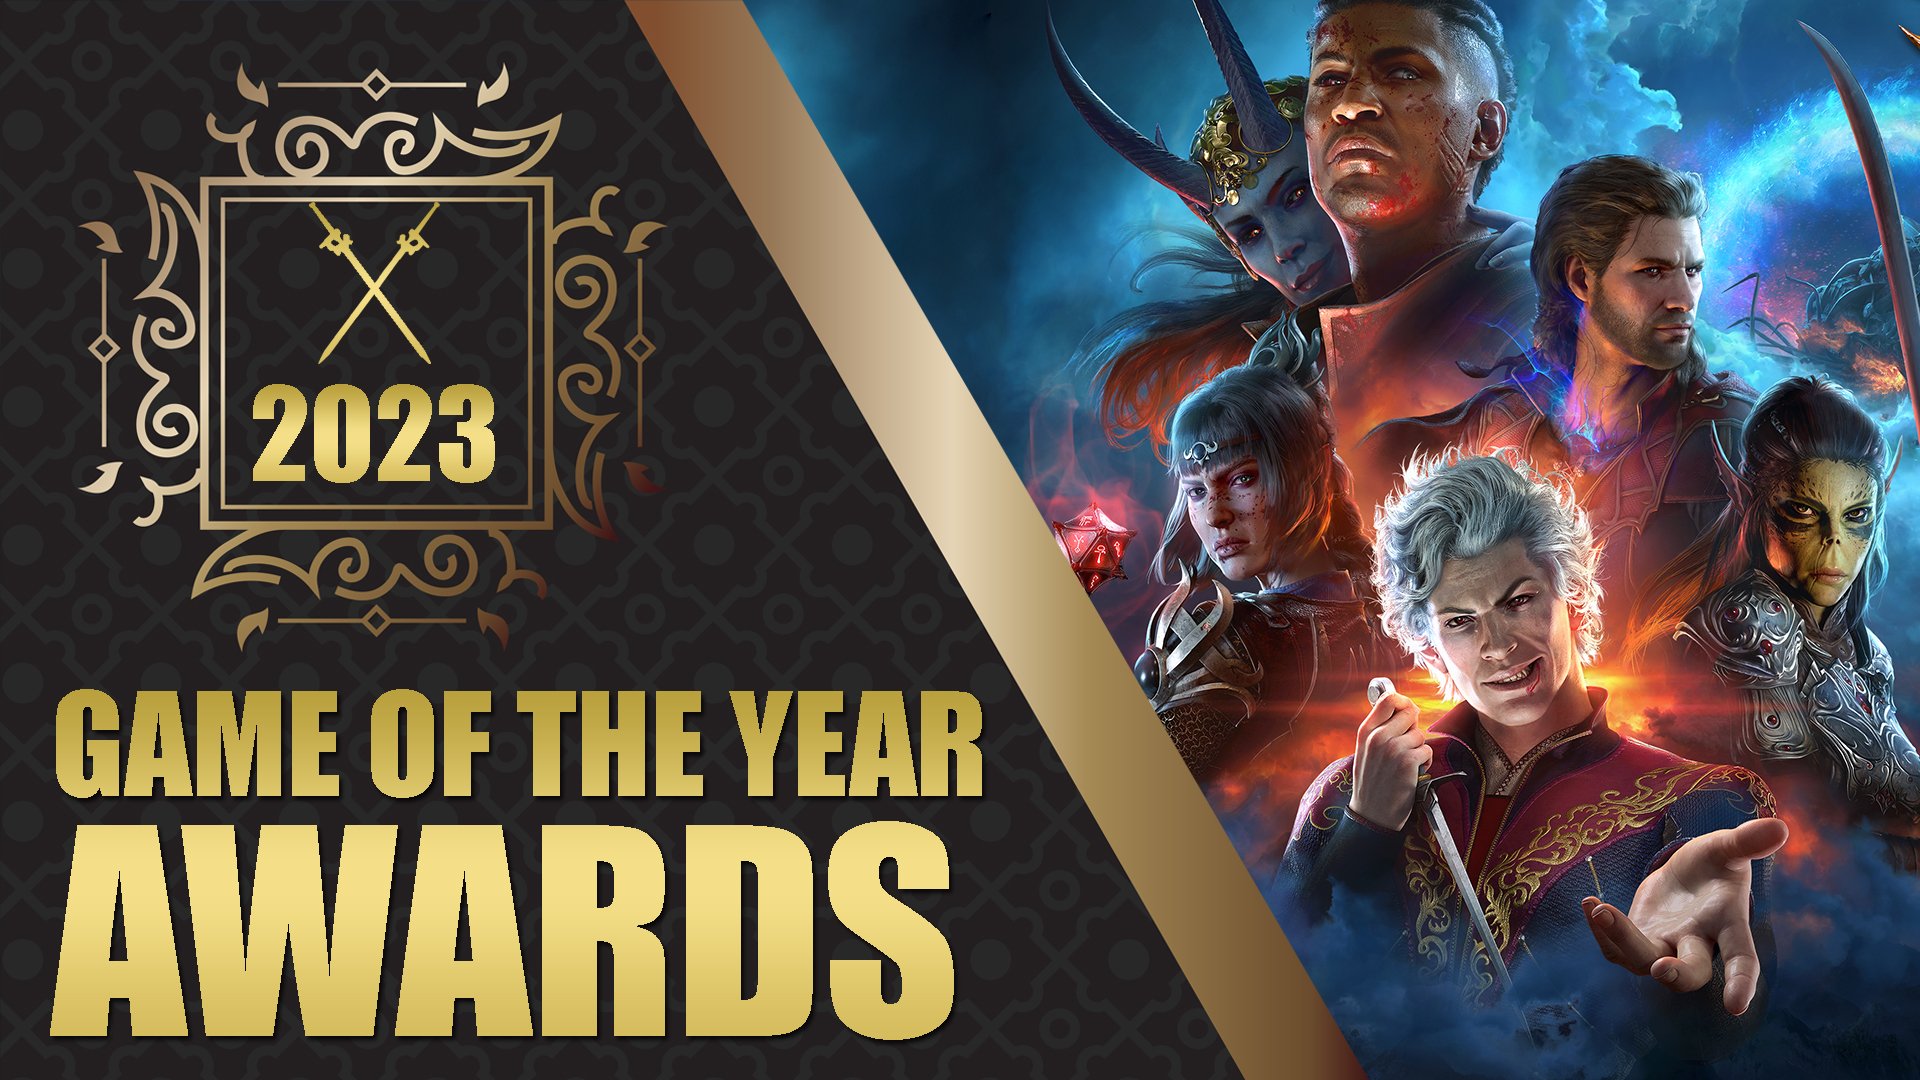 Elden Ring Wins Game of the Year and 3 More Awards at TGA 2022 - Fextralife